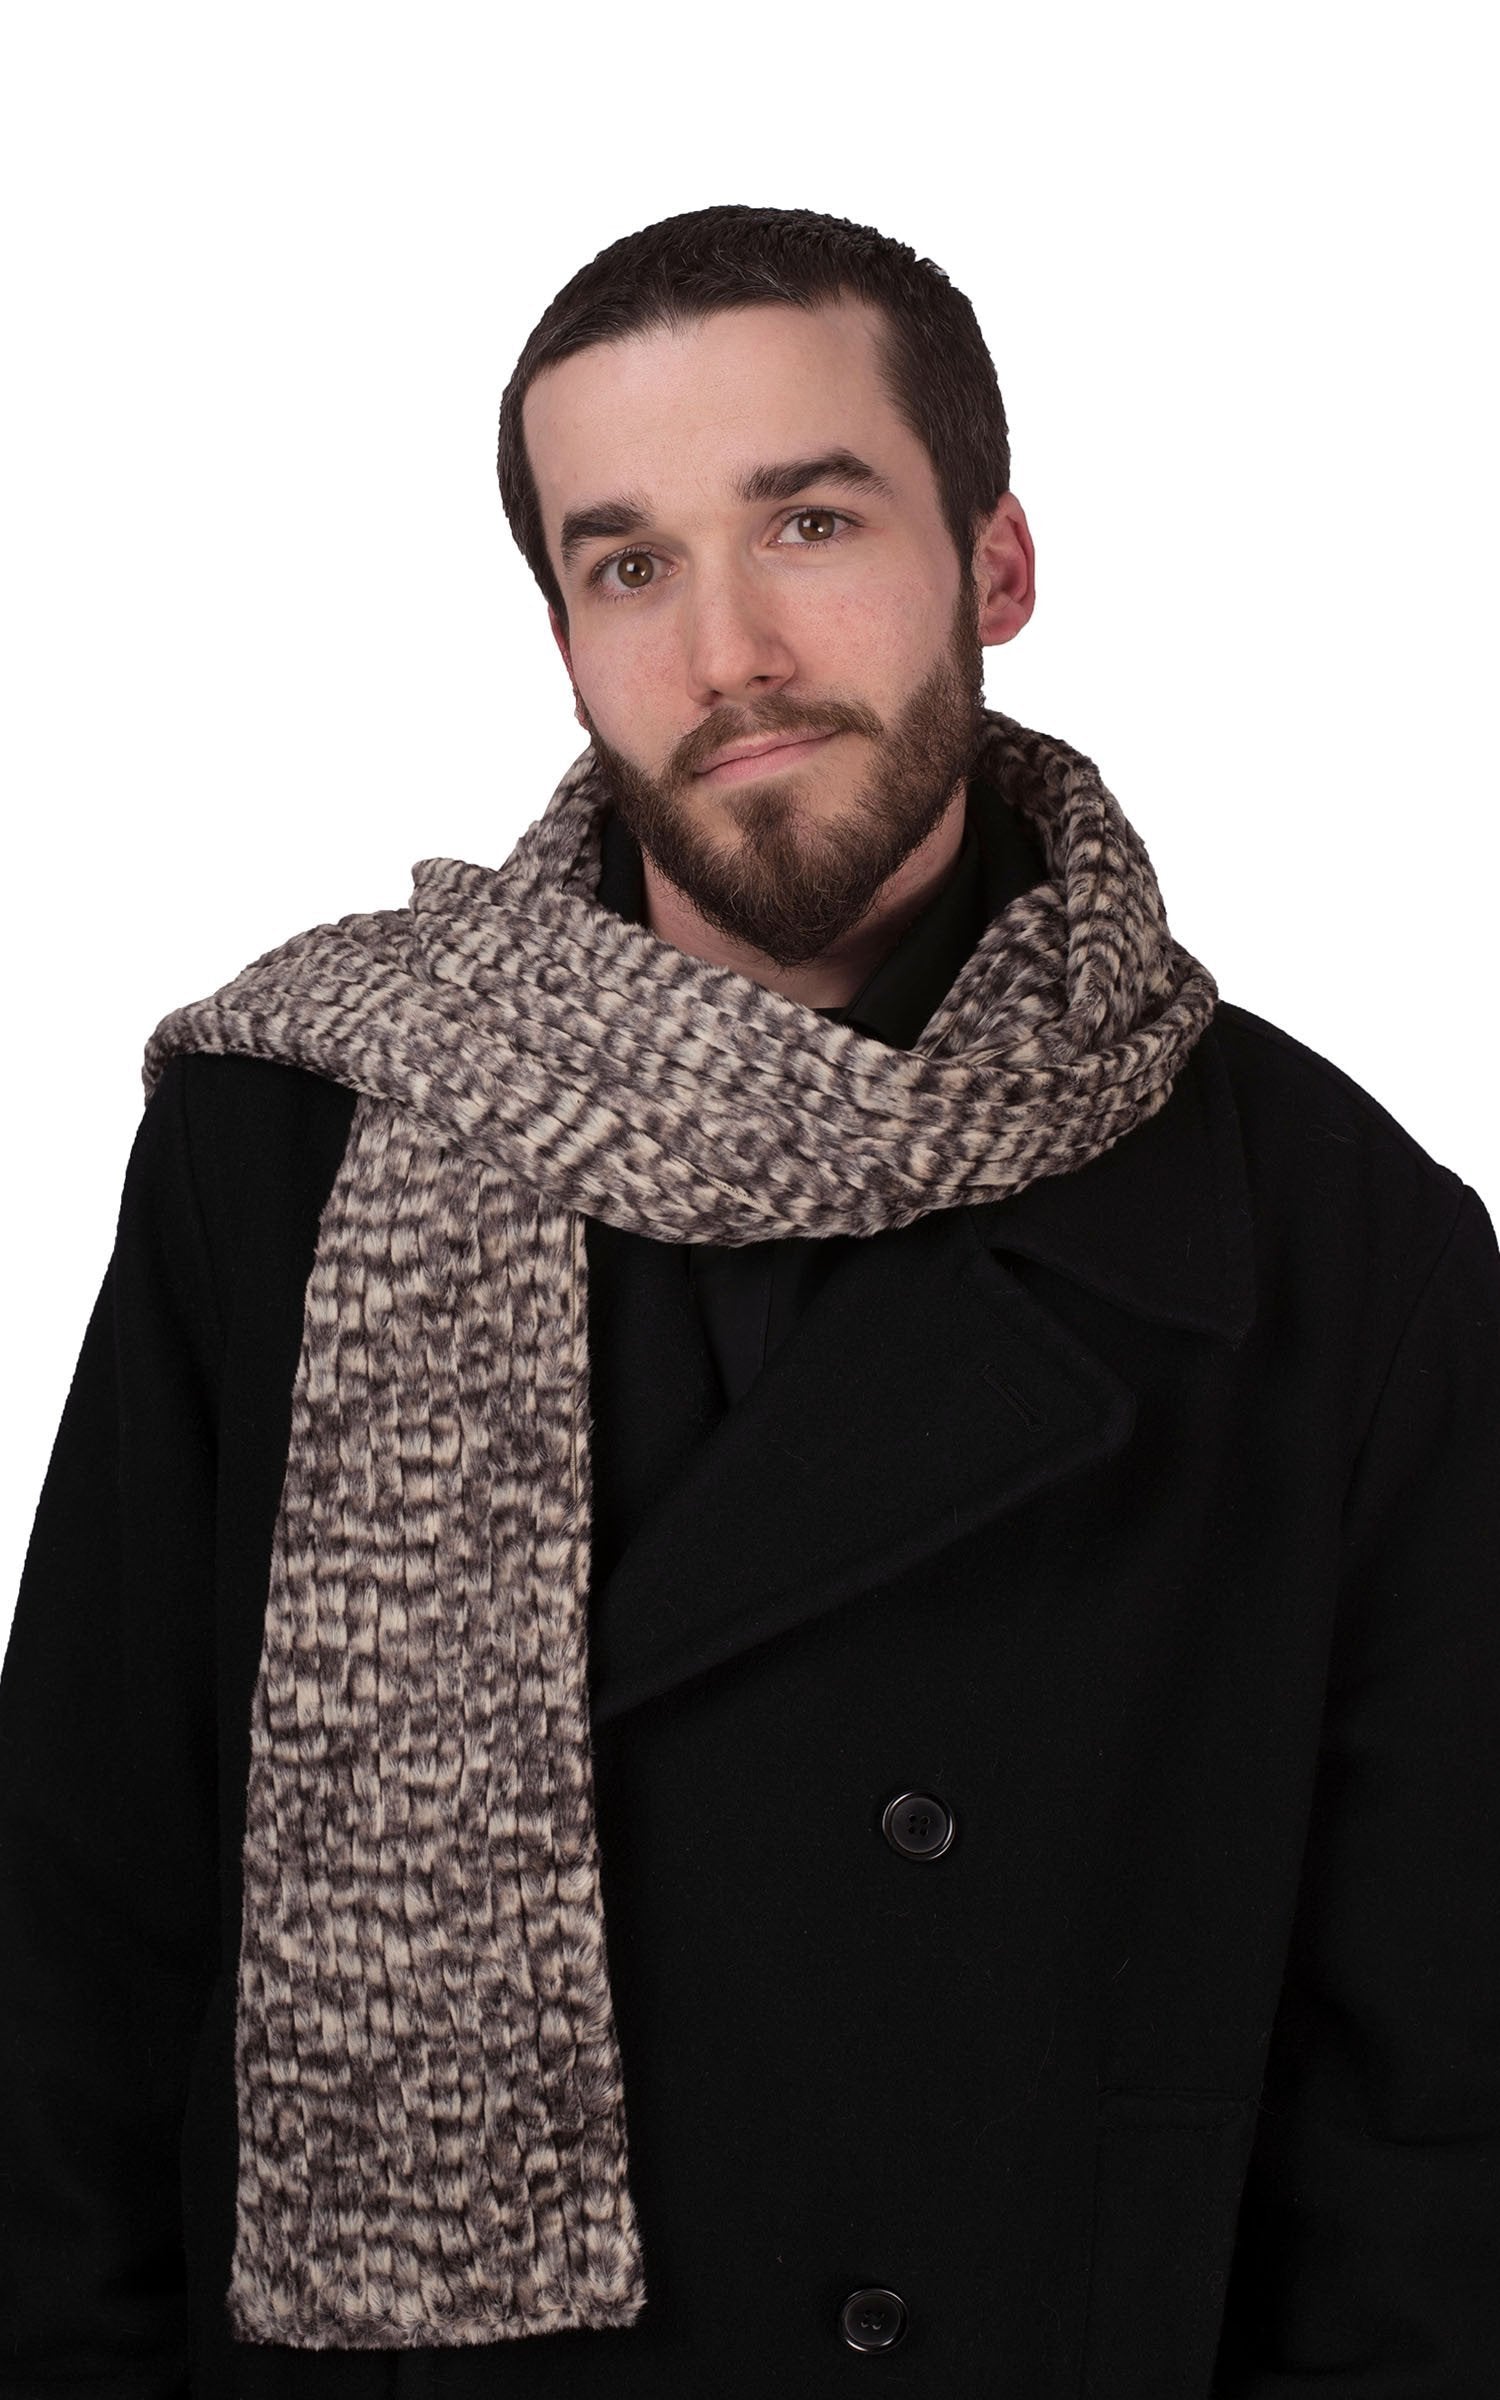 Modeling wearing Men's Classic Scarf | Cobblestone Brown, Taupe and Cream  Faux Fur | Handmade in the USA by Pandemonium Seattle